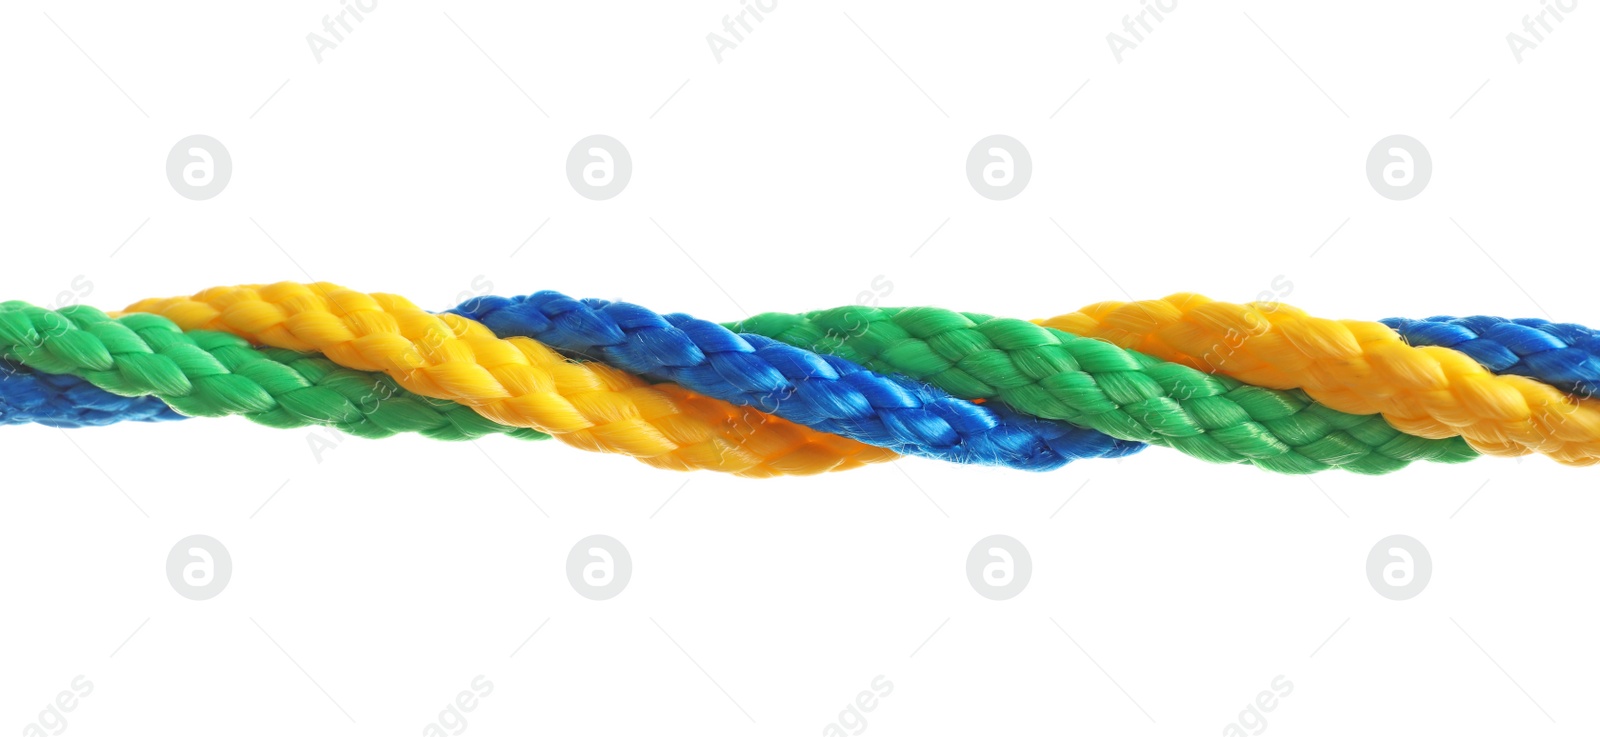 Photo of Twisted colorful ropes on white background. Unity concept